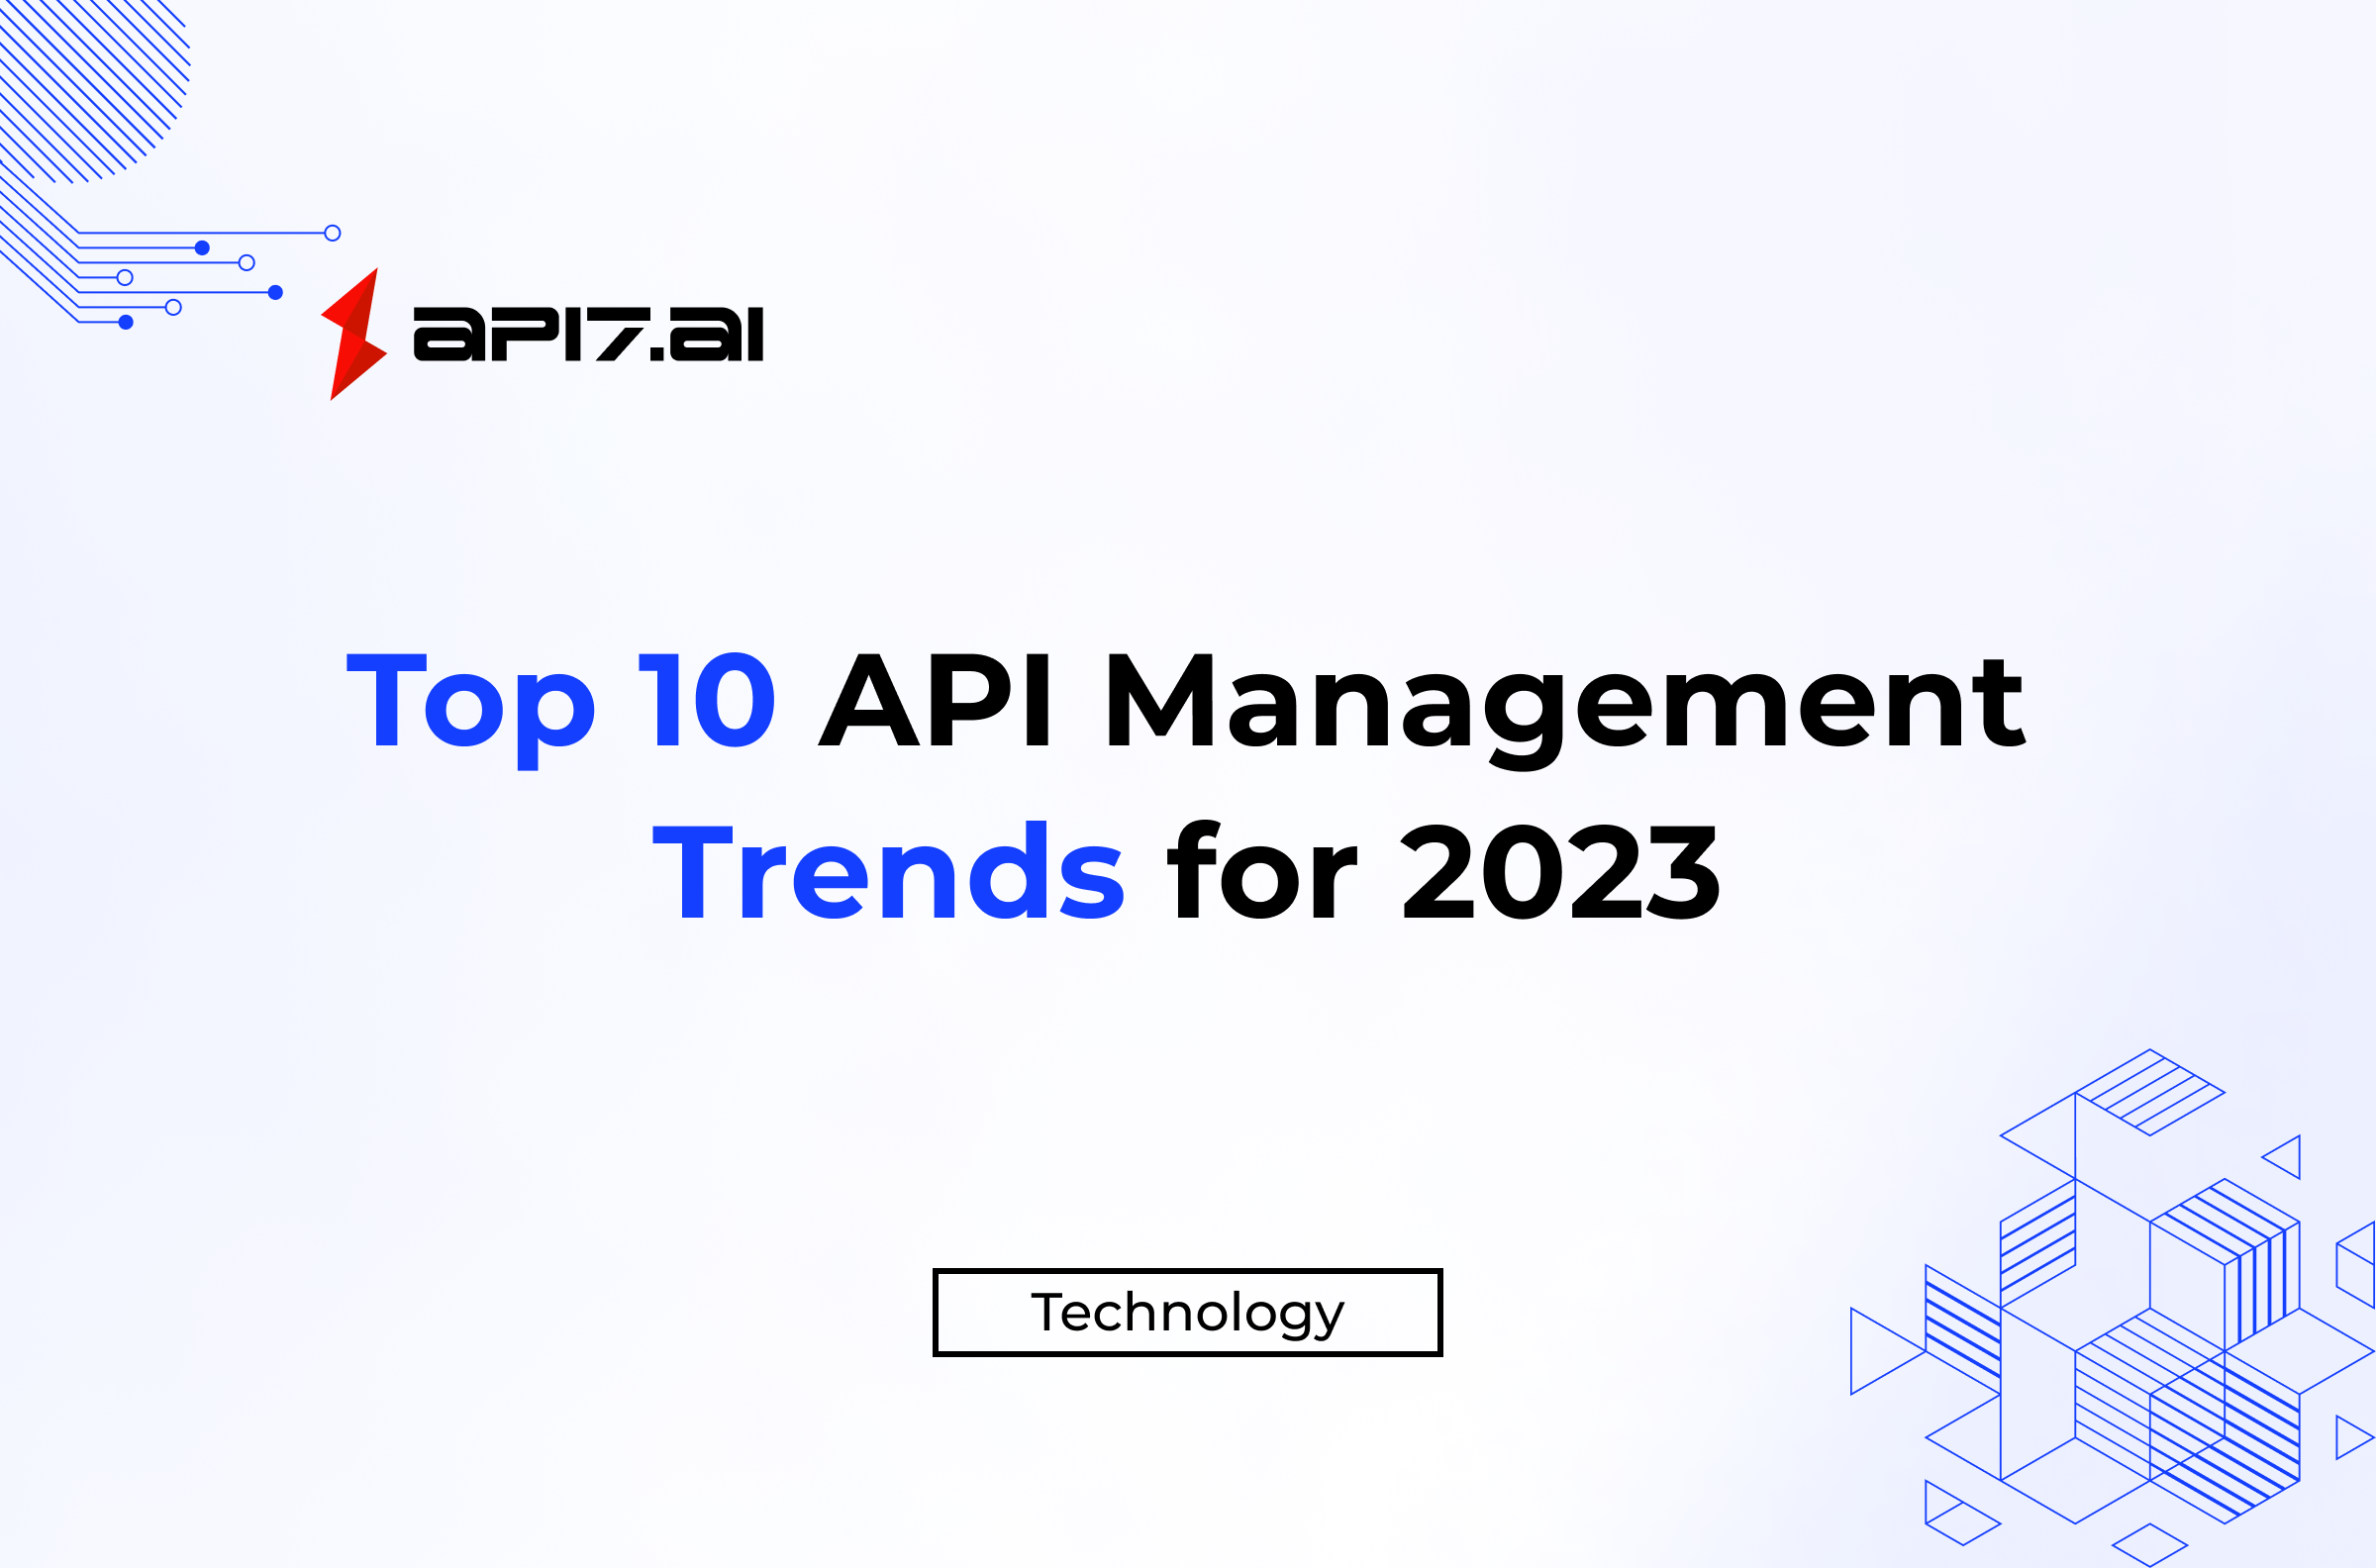 Top 10 API Management Trends for 2023